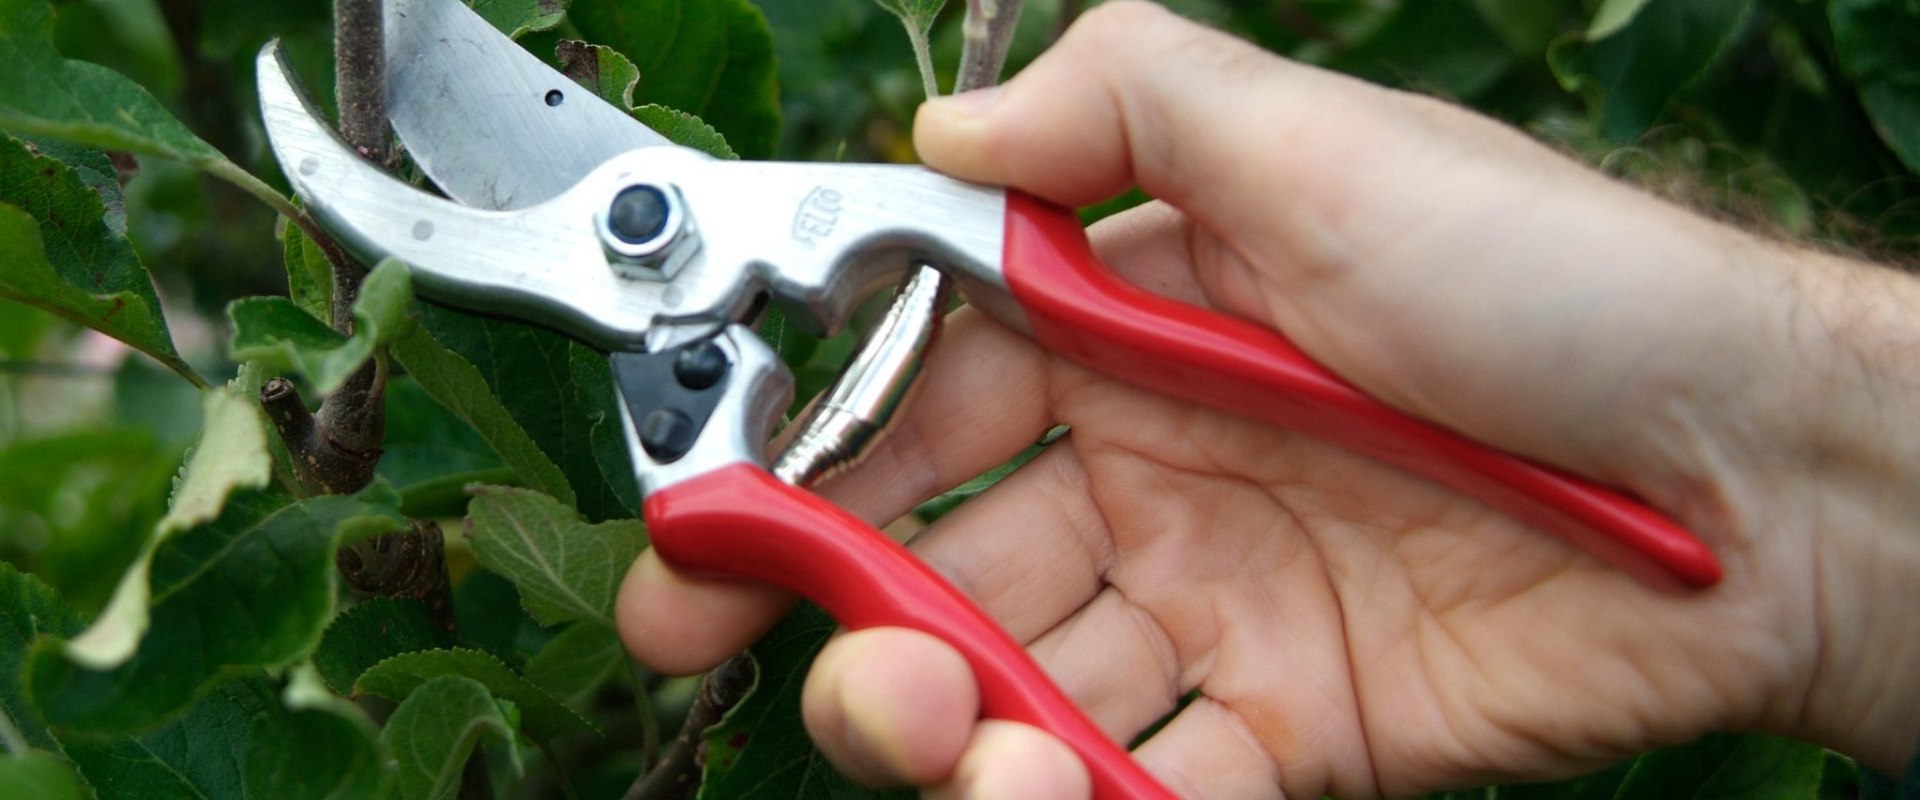 Lopping Shears and Saws: An Overview